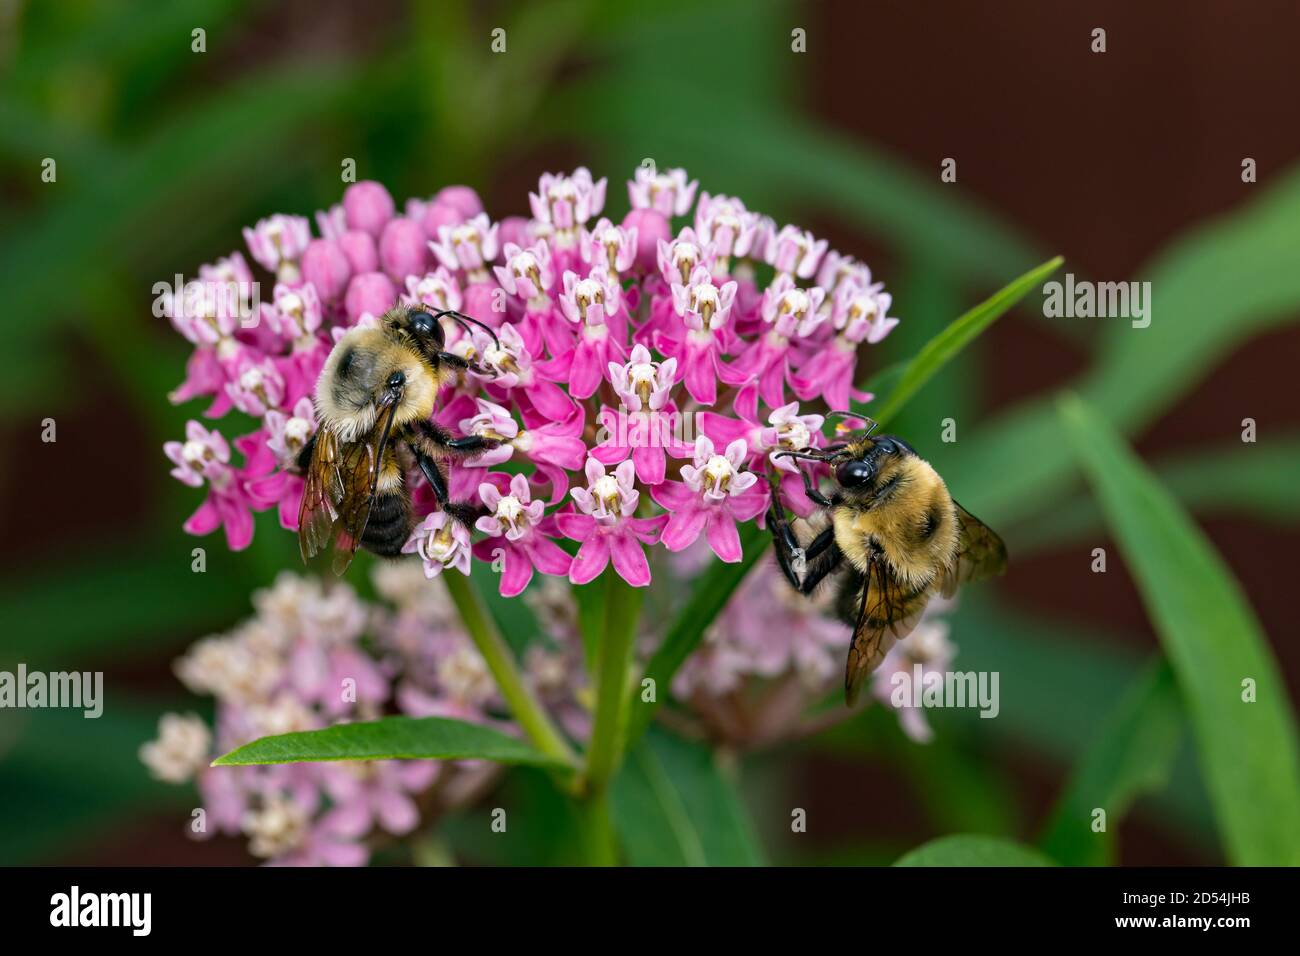 Closeup of two common Eastern Bumble Bees on swamp milkweed wildflower. Concept of insect, wildlife conservation, habitat preservation, flower garden Stock Photo